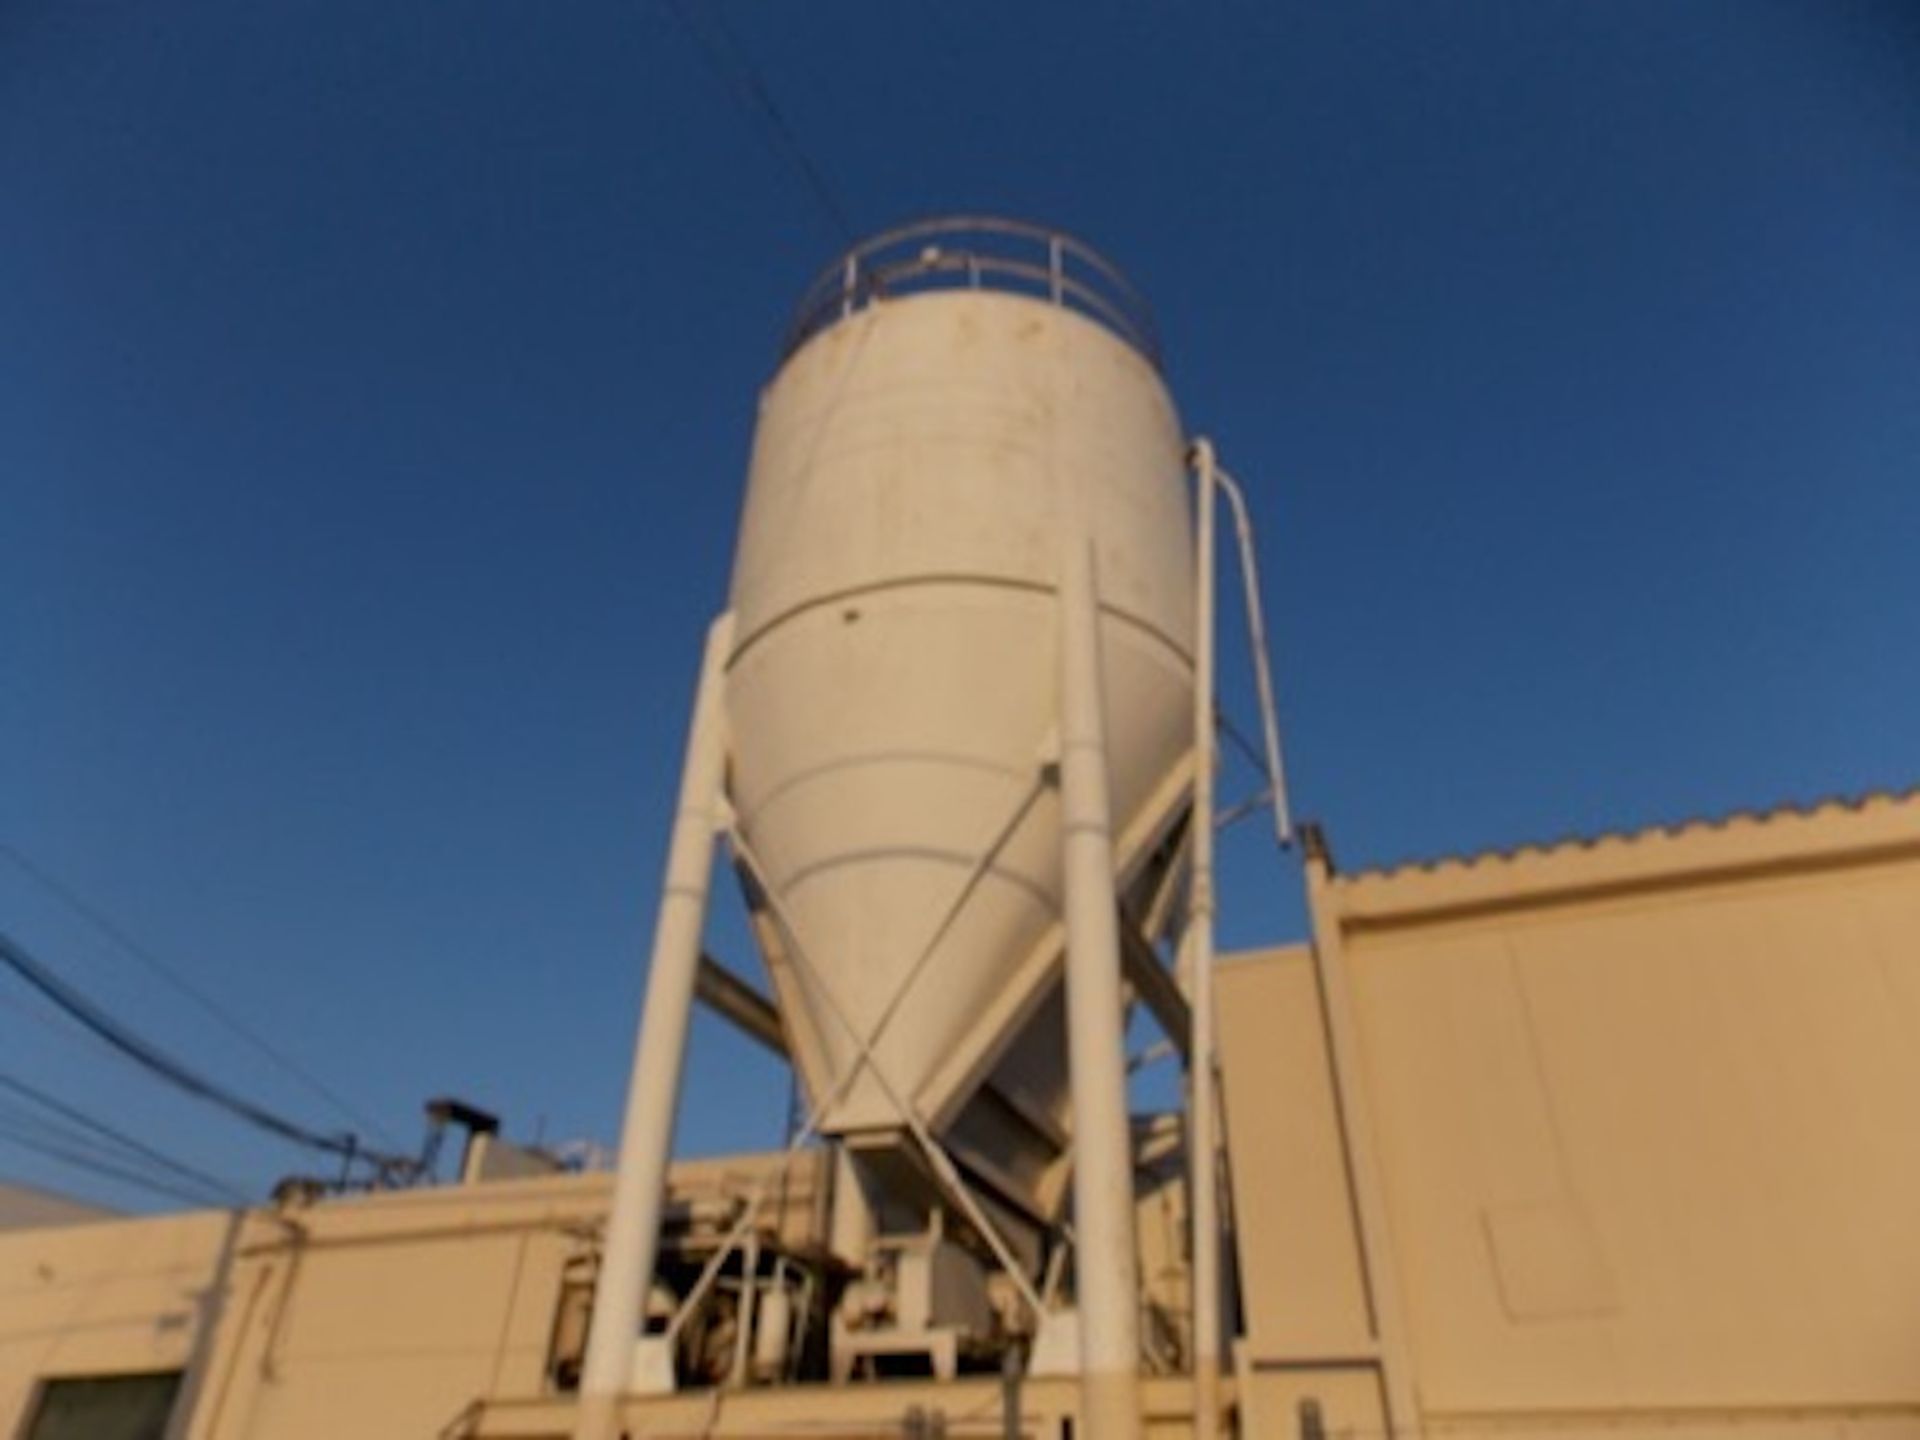 Flour Silo w/ Ladder, Overall Size: 11' Dia. x 22' Tall, Silo Only, No Legs w/ Airlock & Vacuum - Image 3 of 3